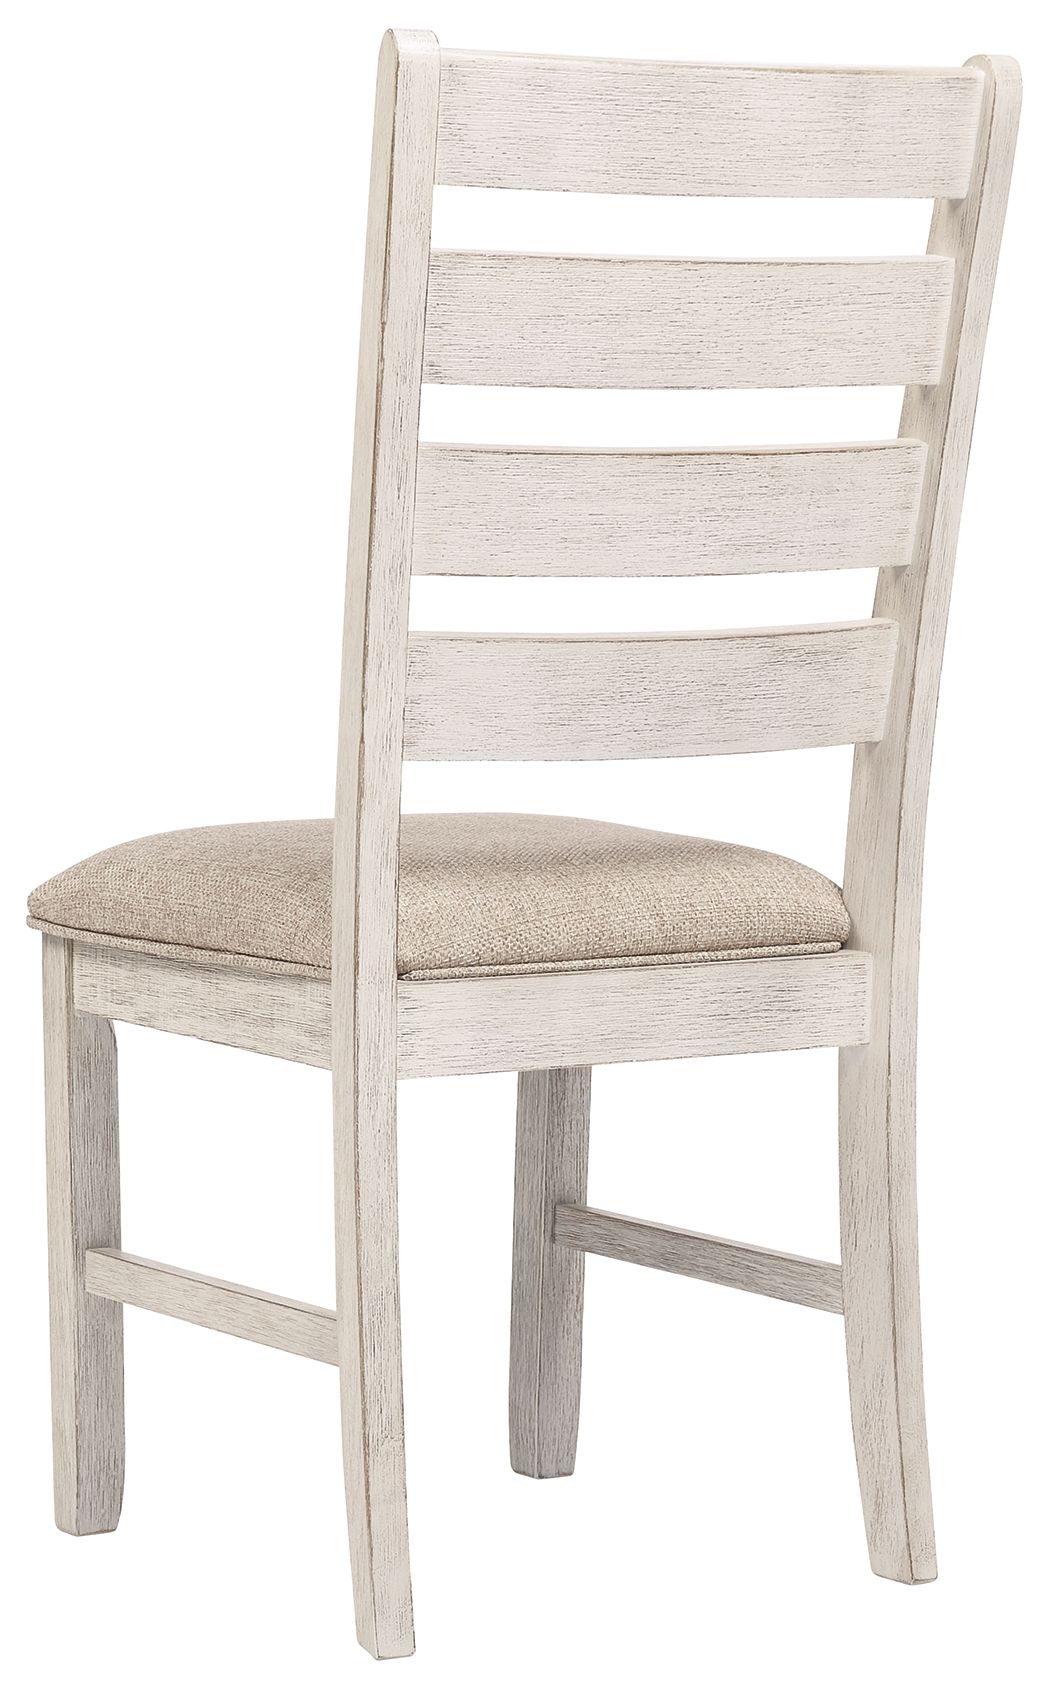 Skempton - White - Dining Uph Side Chair (Set of 2) - Tony's Home Furnishings